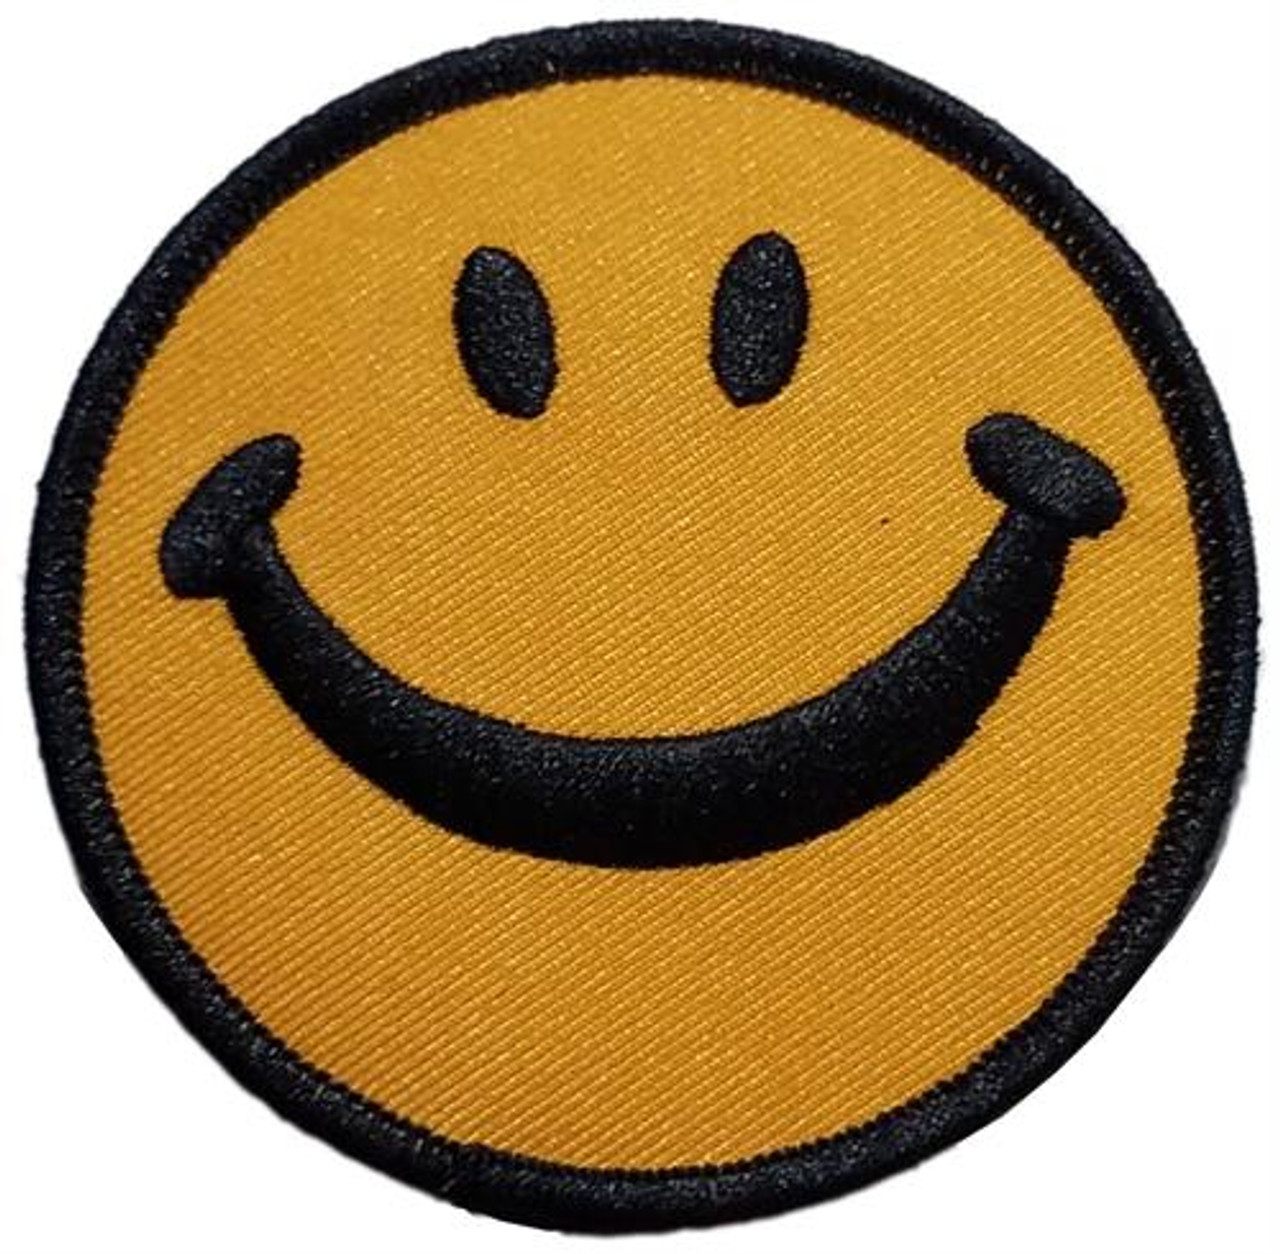 Smiley Face Embroidered Sew On Patch - 3 Round 